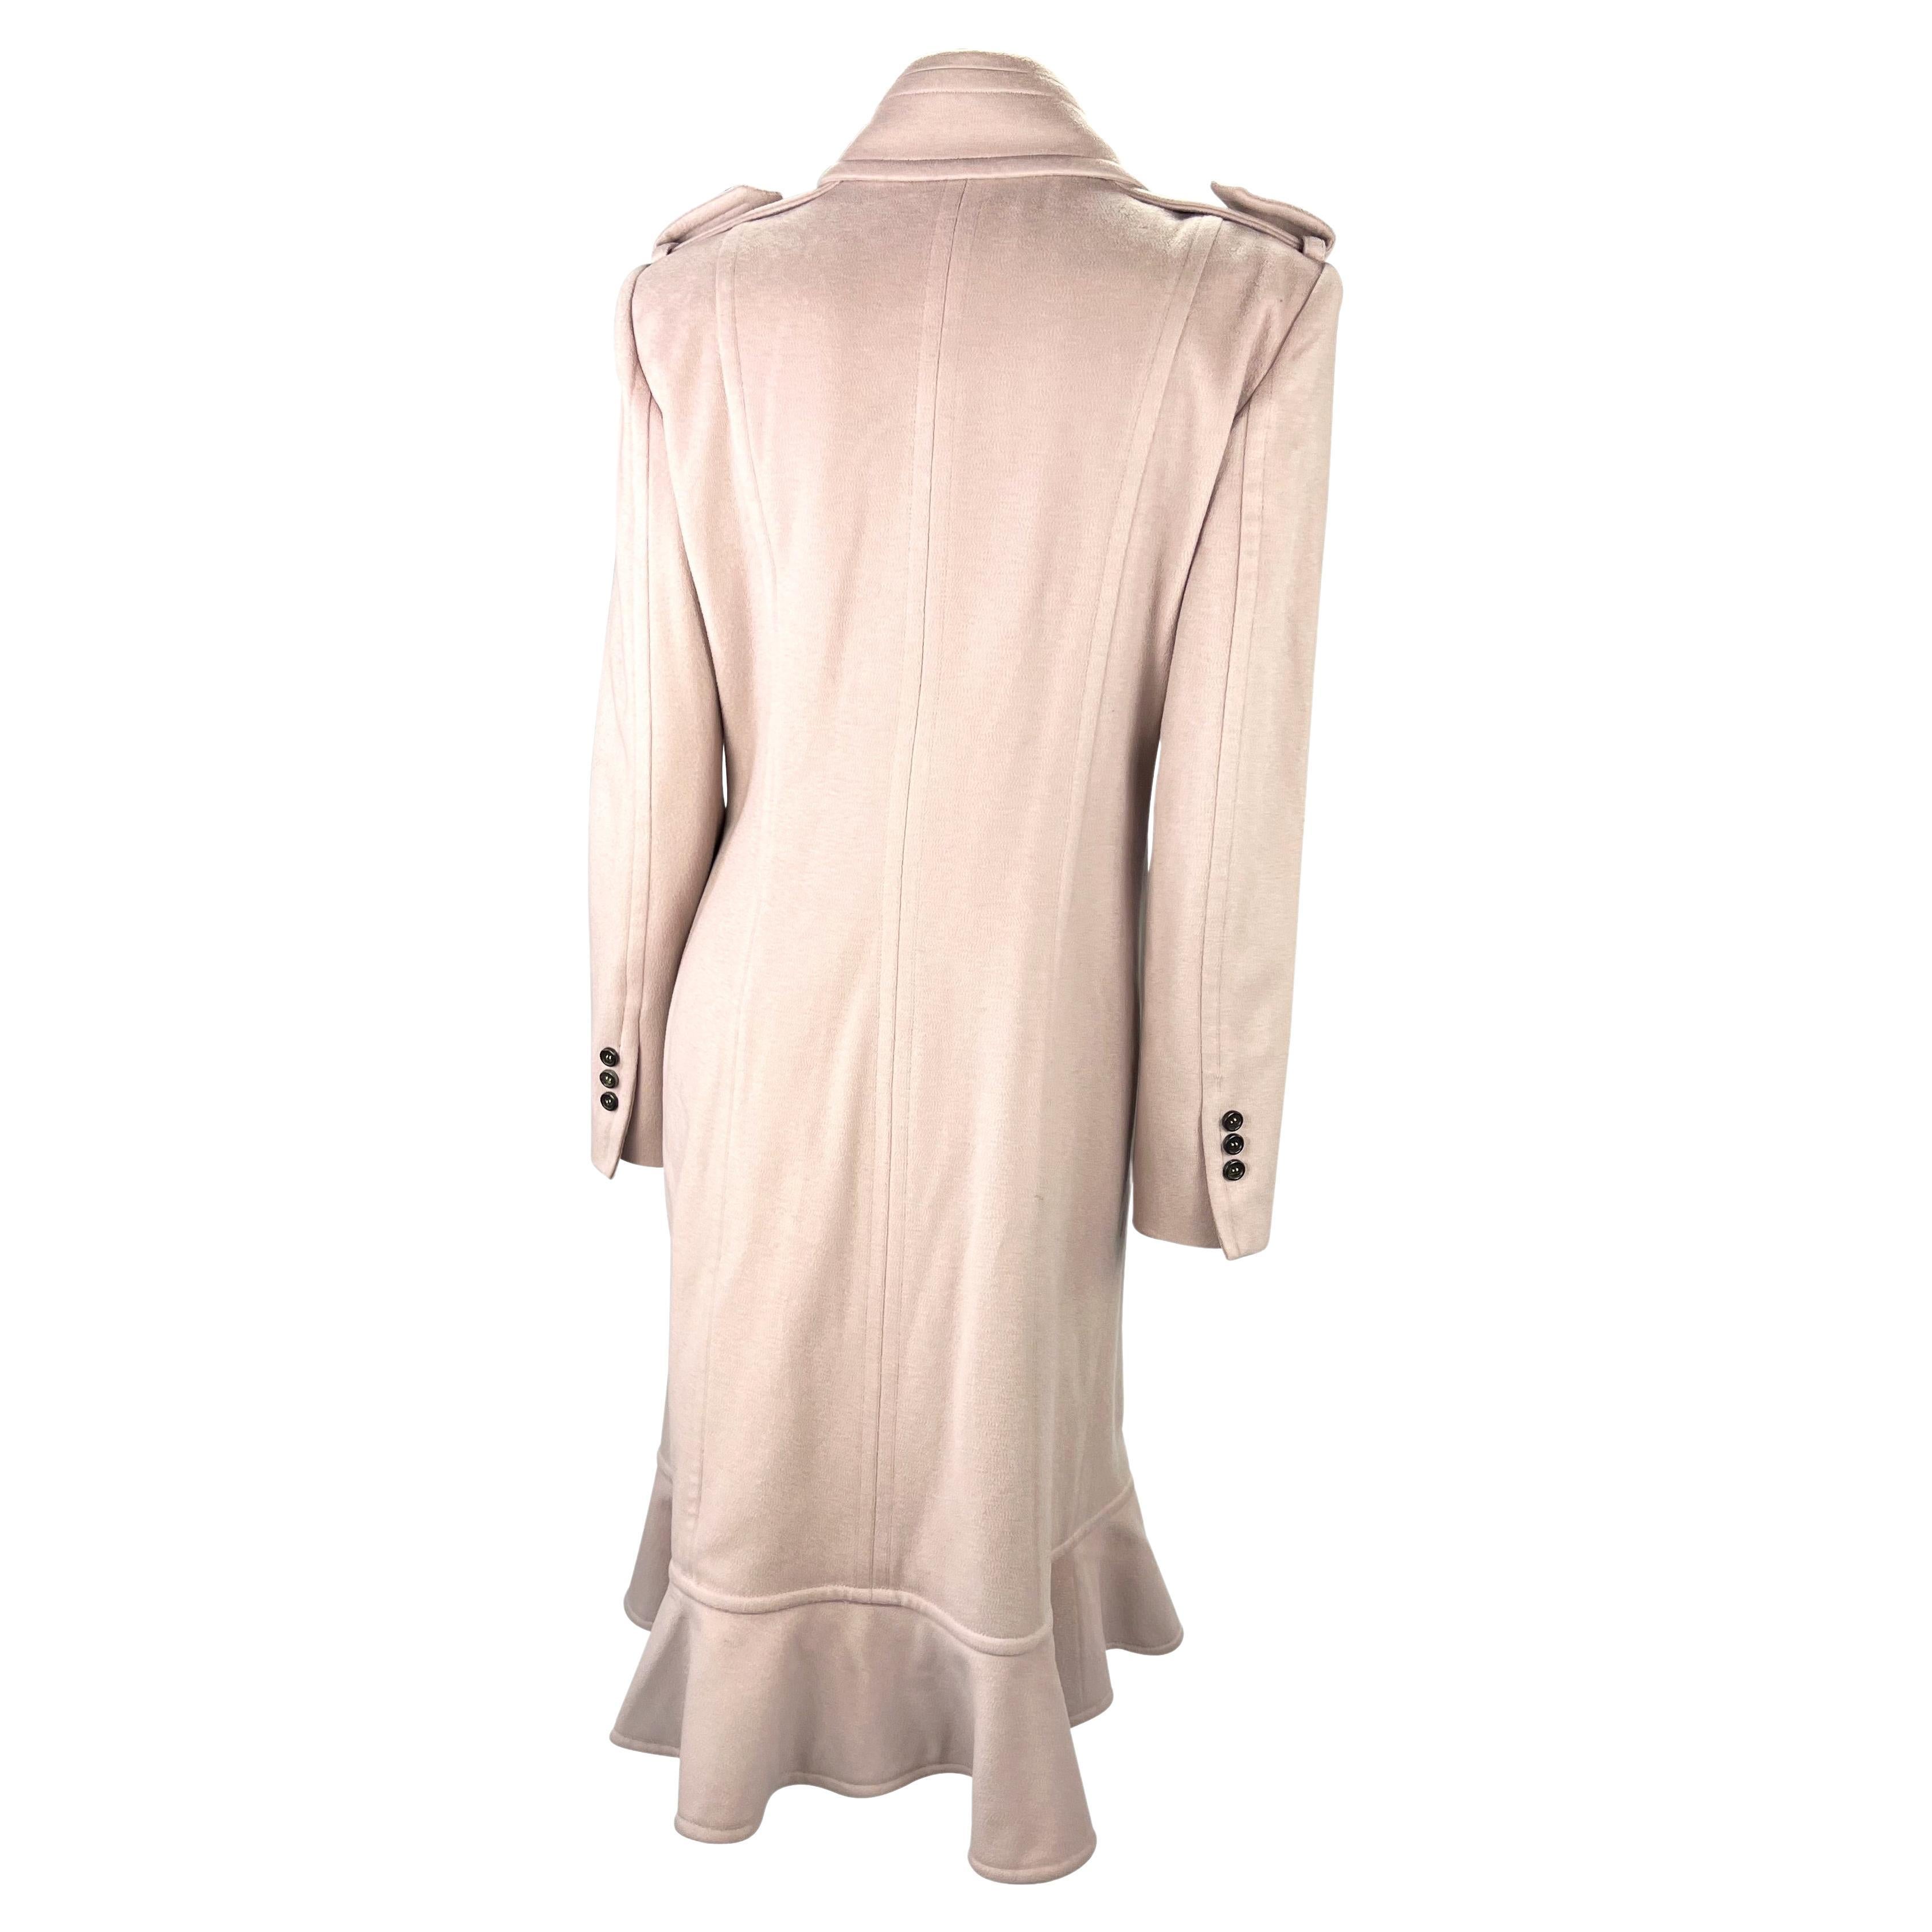 F/W 2003 Yves Saint Laurent by Tom Ford Runway Ruffle Overcoat Hot Pink Lining For Sale 1